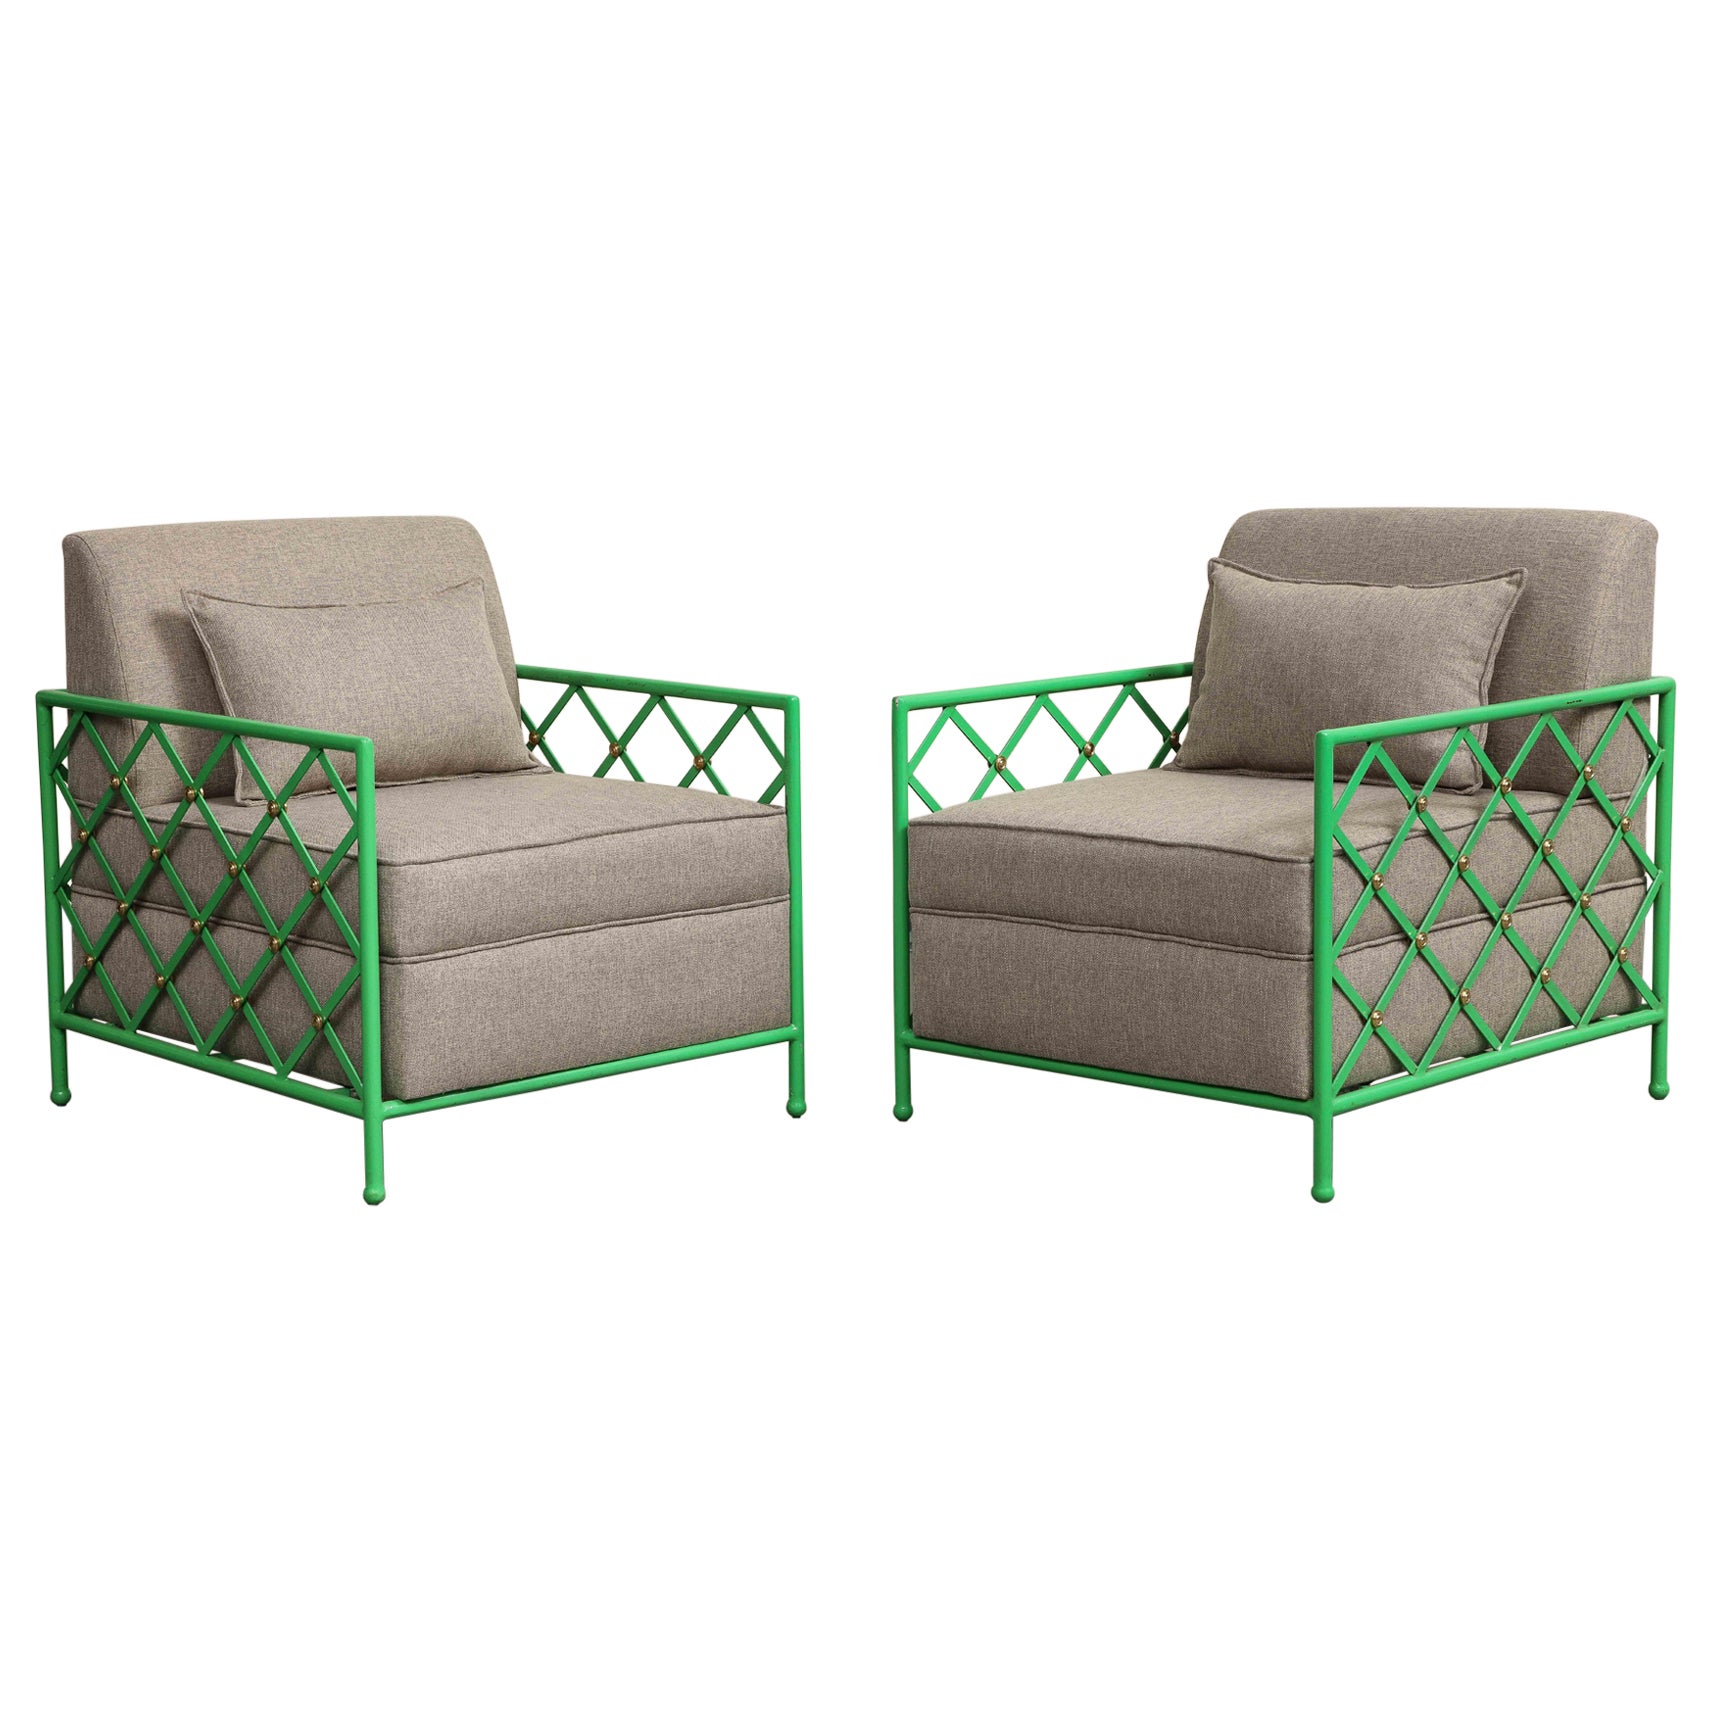 Pair of Midcentury French Style Bright Green Enameled Iron Cube Lounge Chairs For Sale